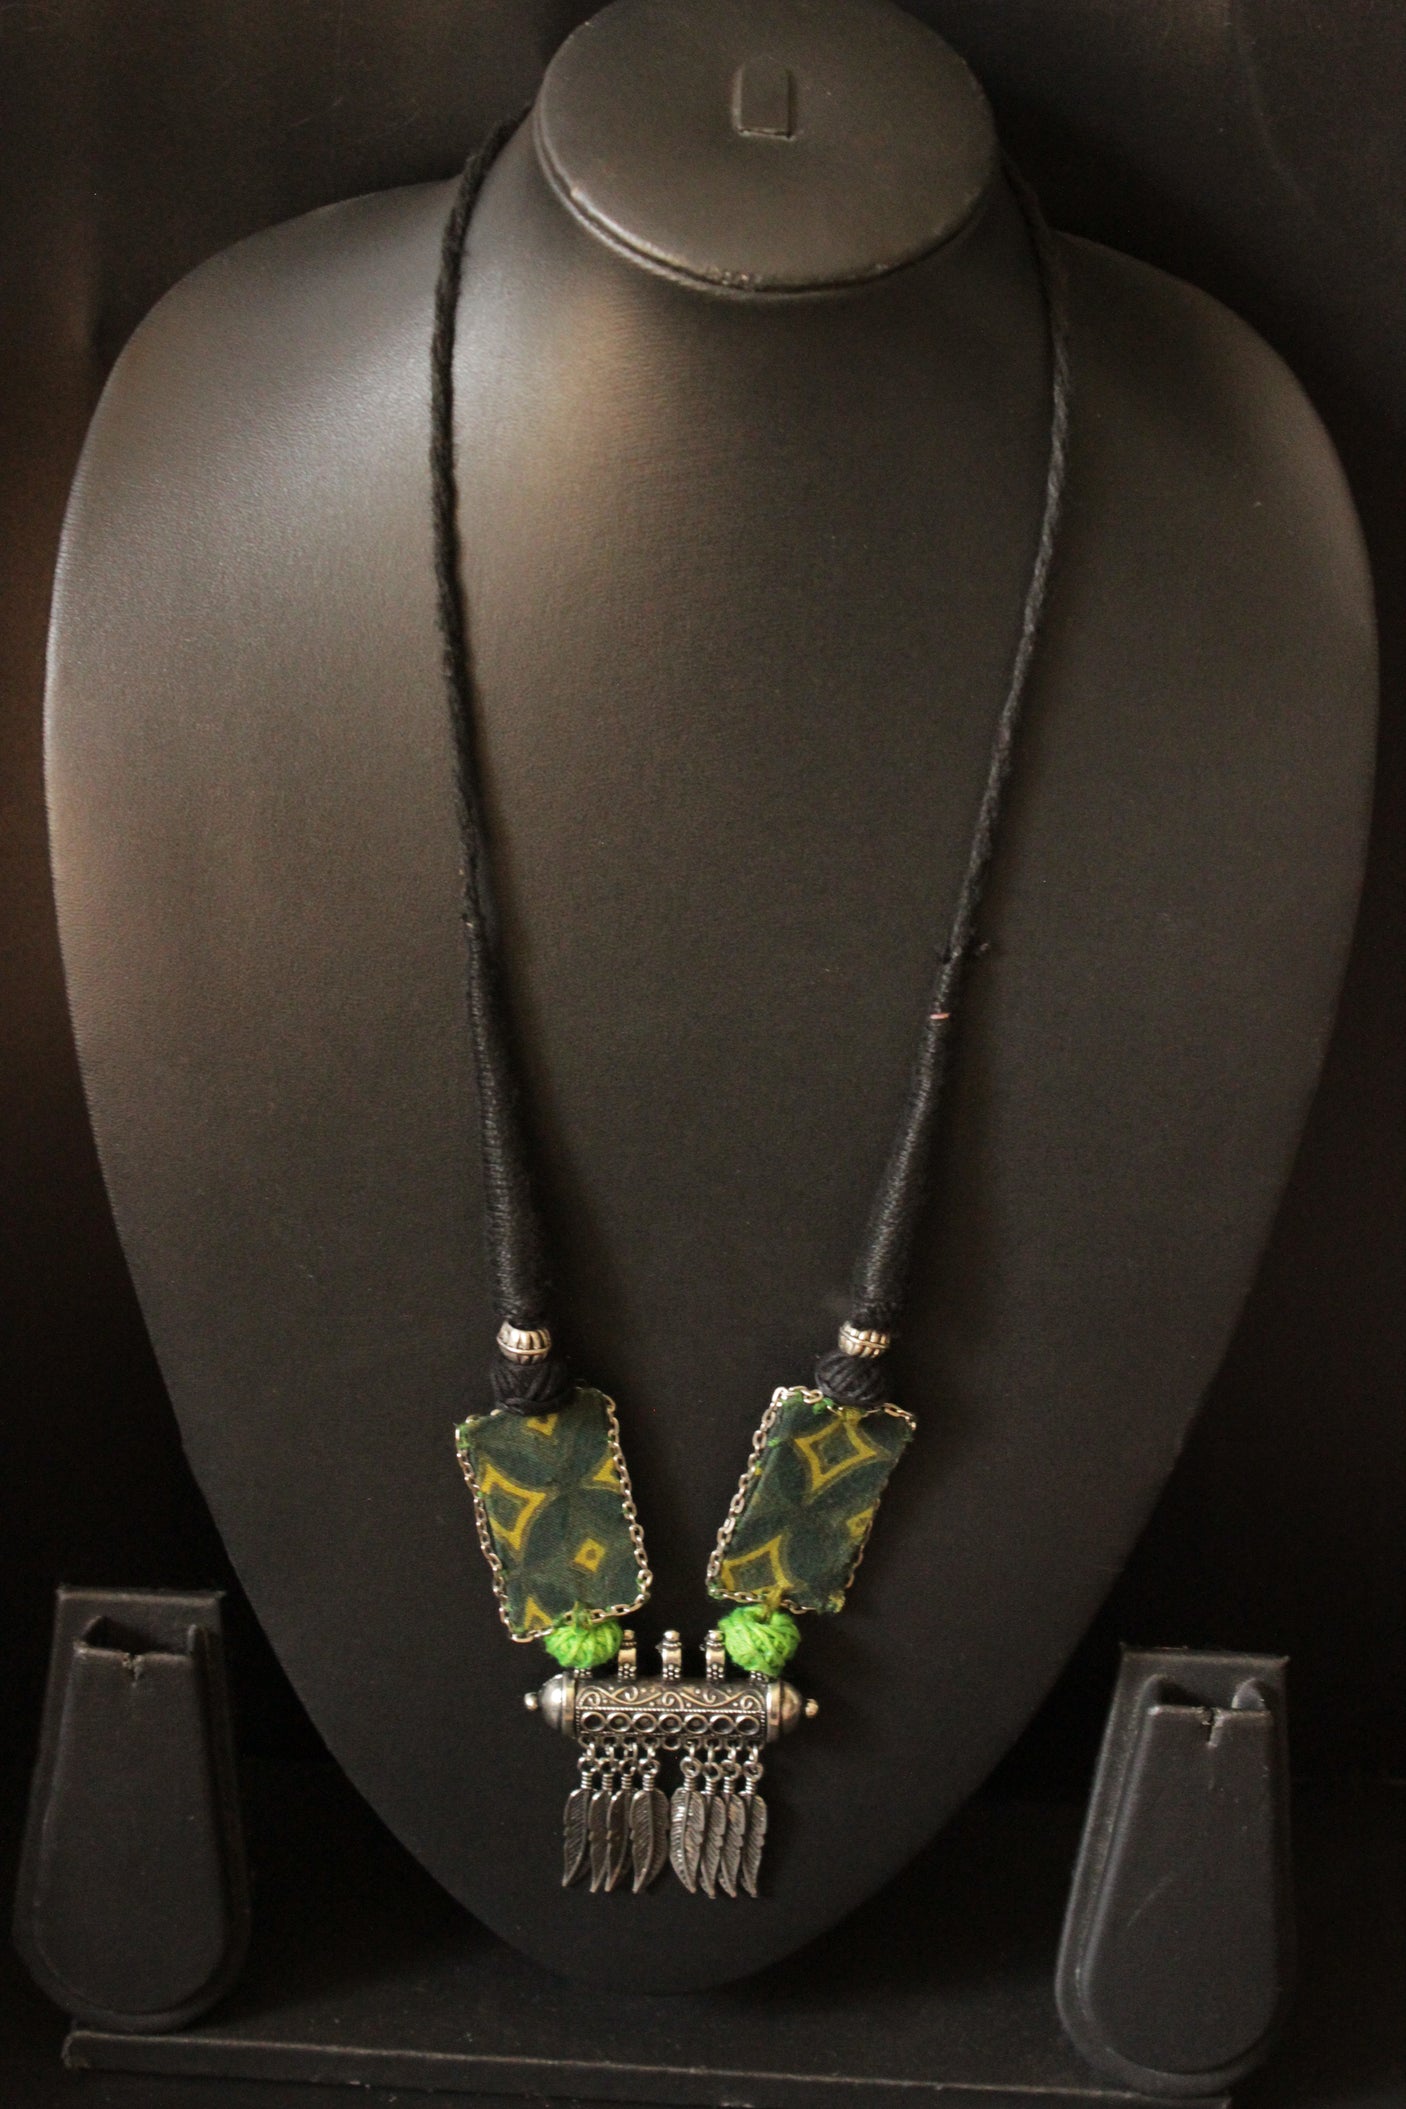 Adjustable Thread Closure Handcrafted Green Necklace with Oxidised Finish Pendant